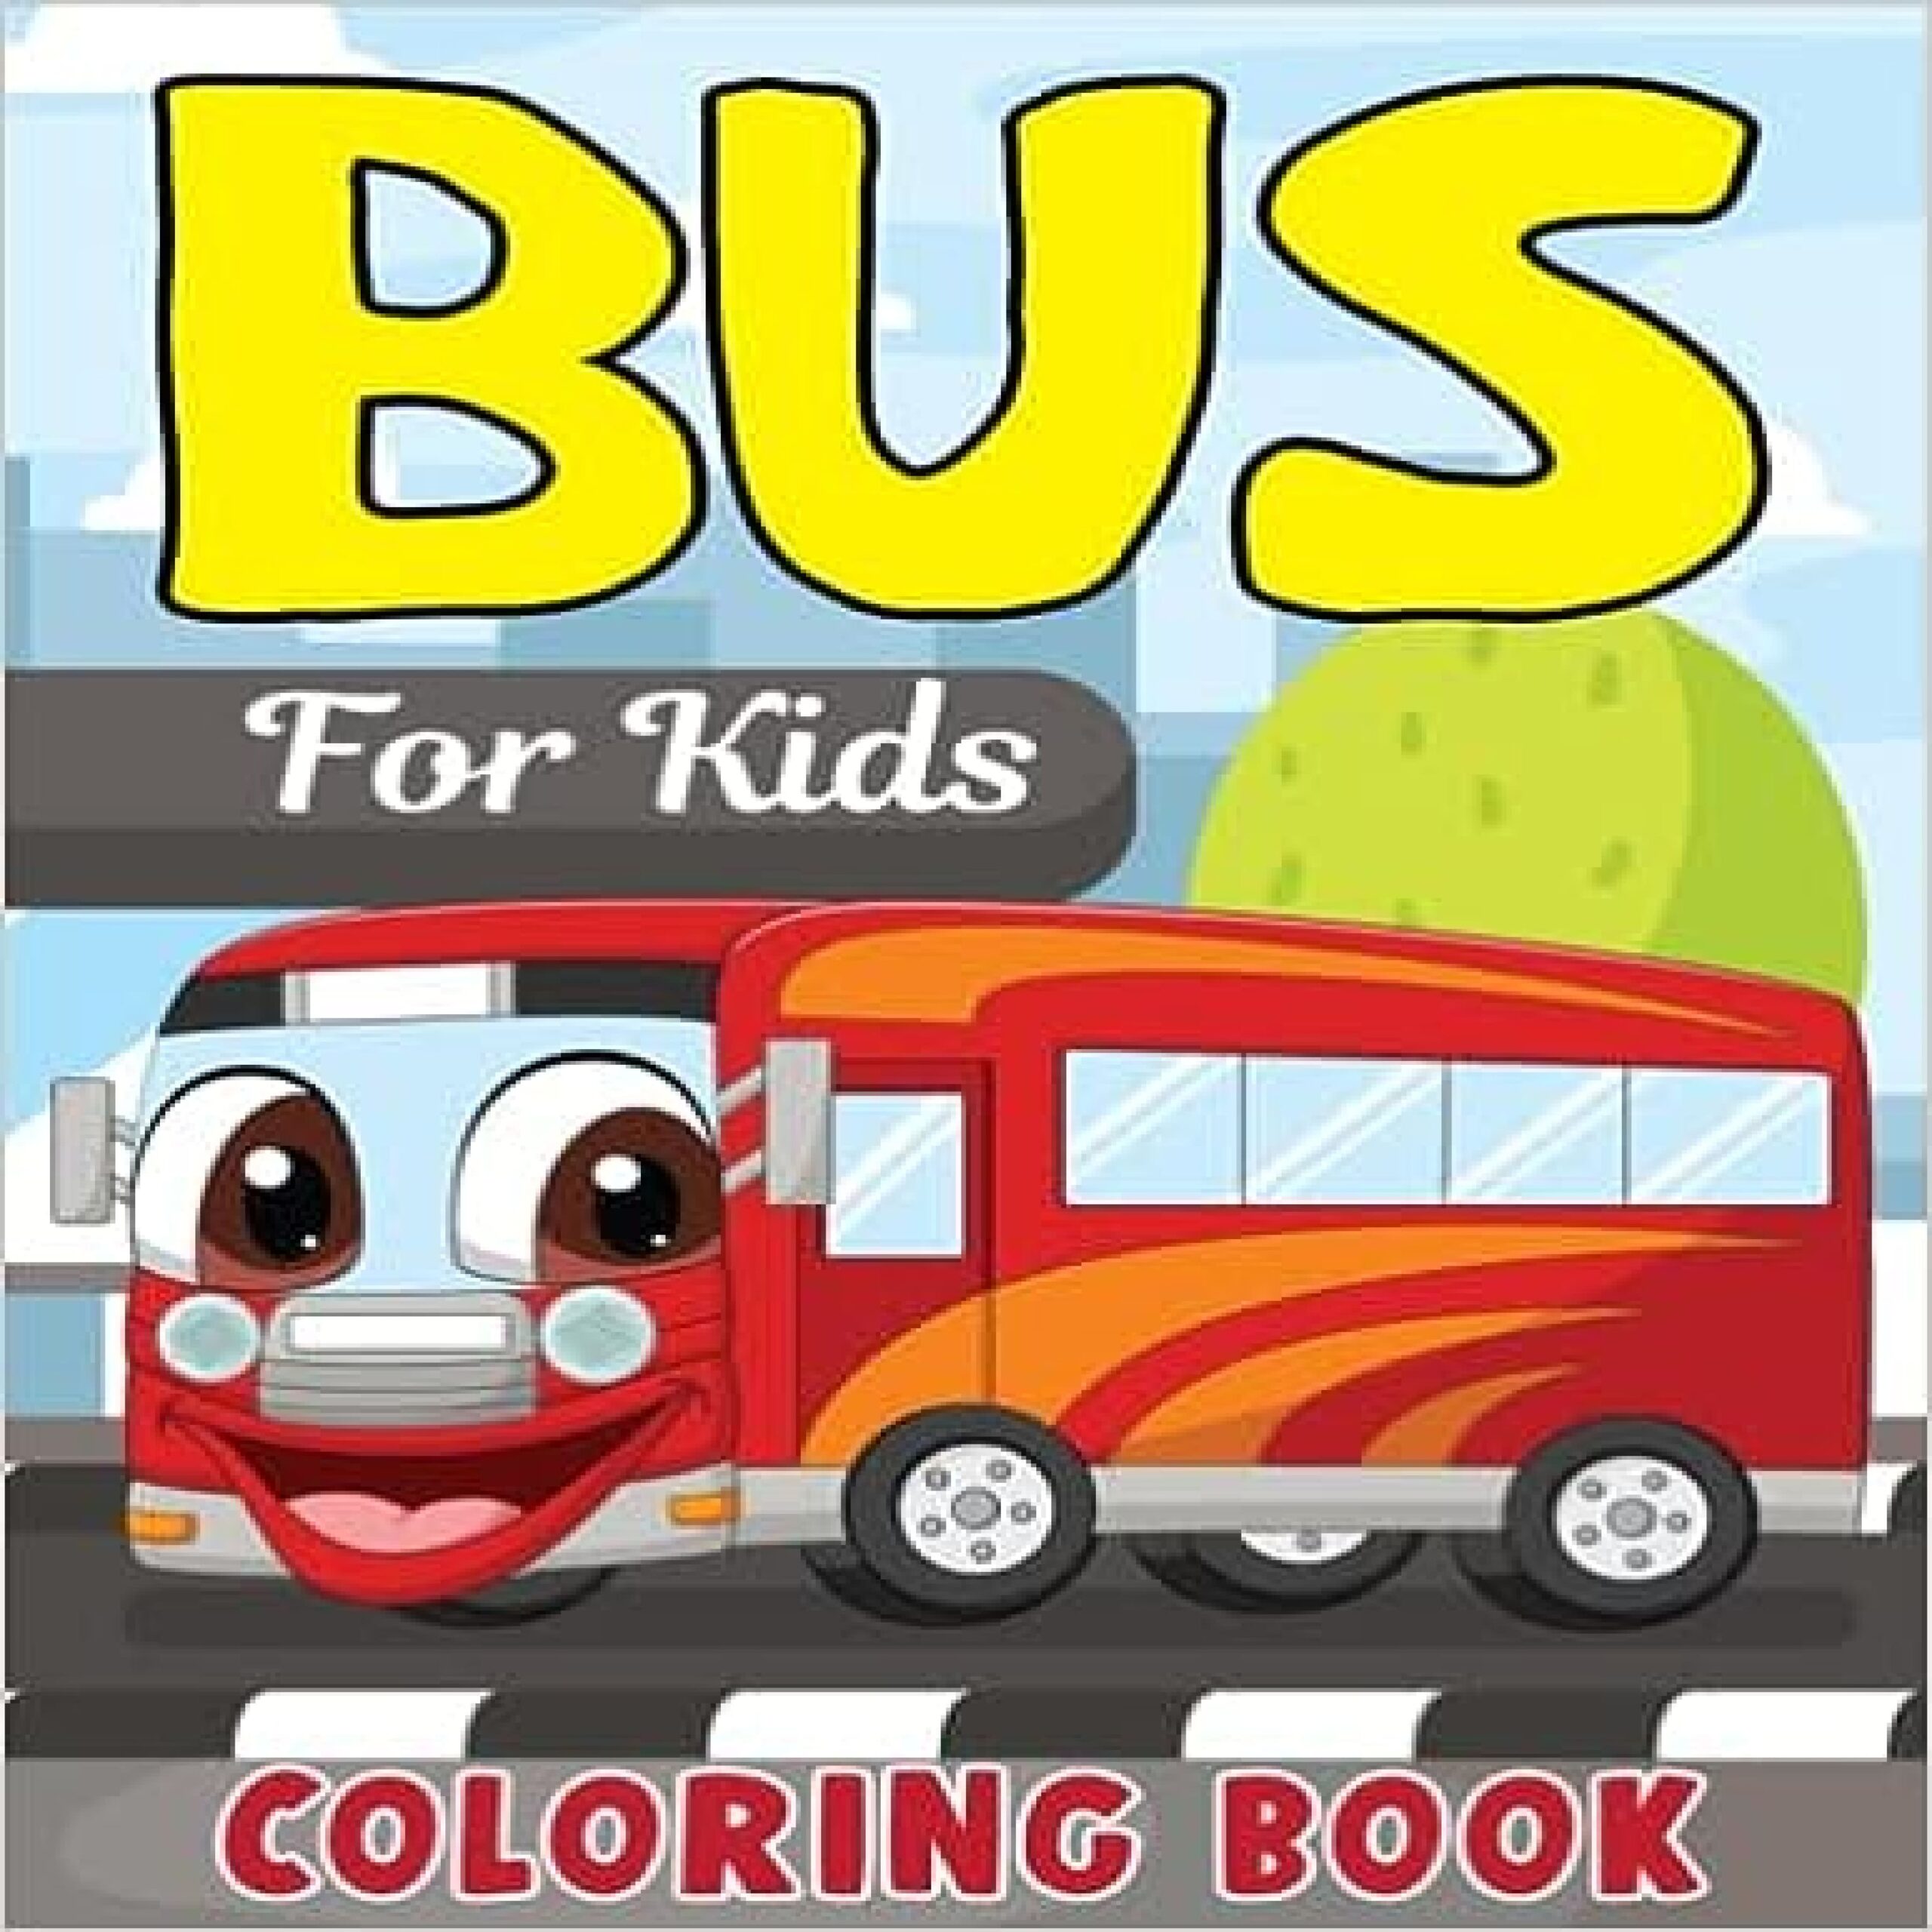 Bus coloring book for kids featuring fun beauty stress relieving relaxation made by teachers